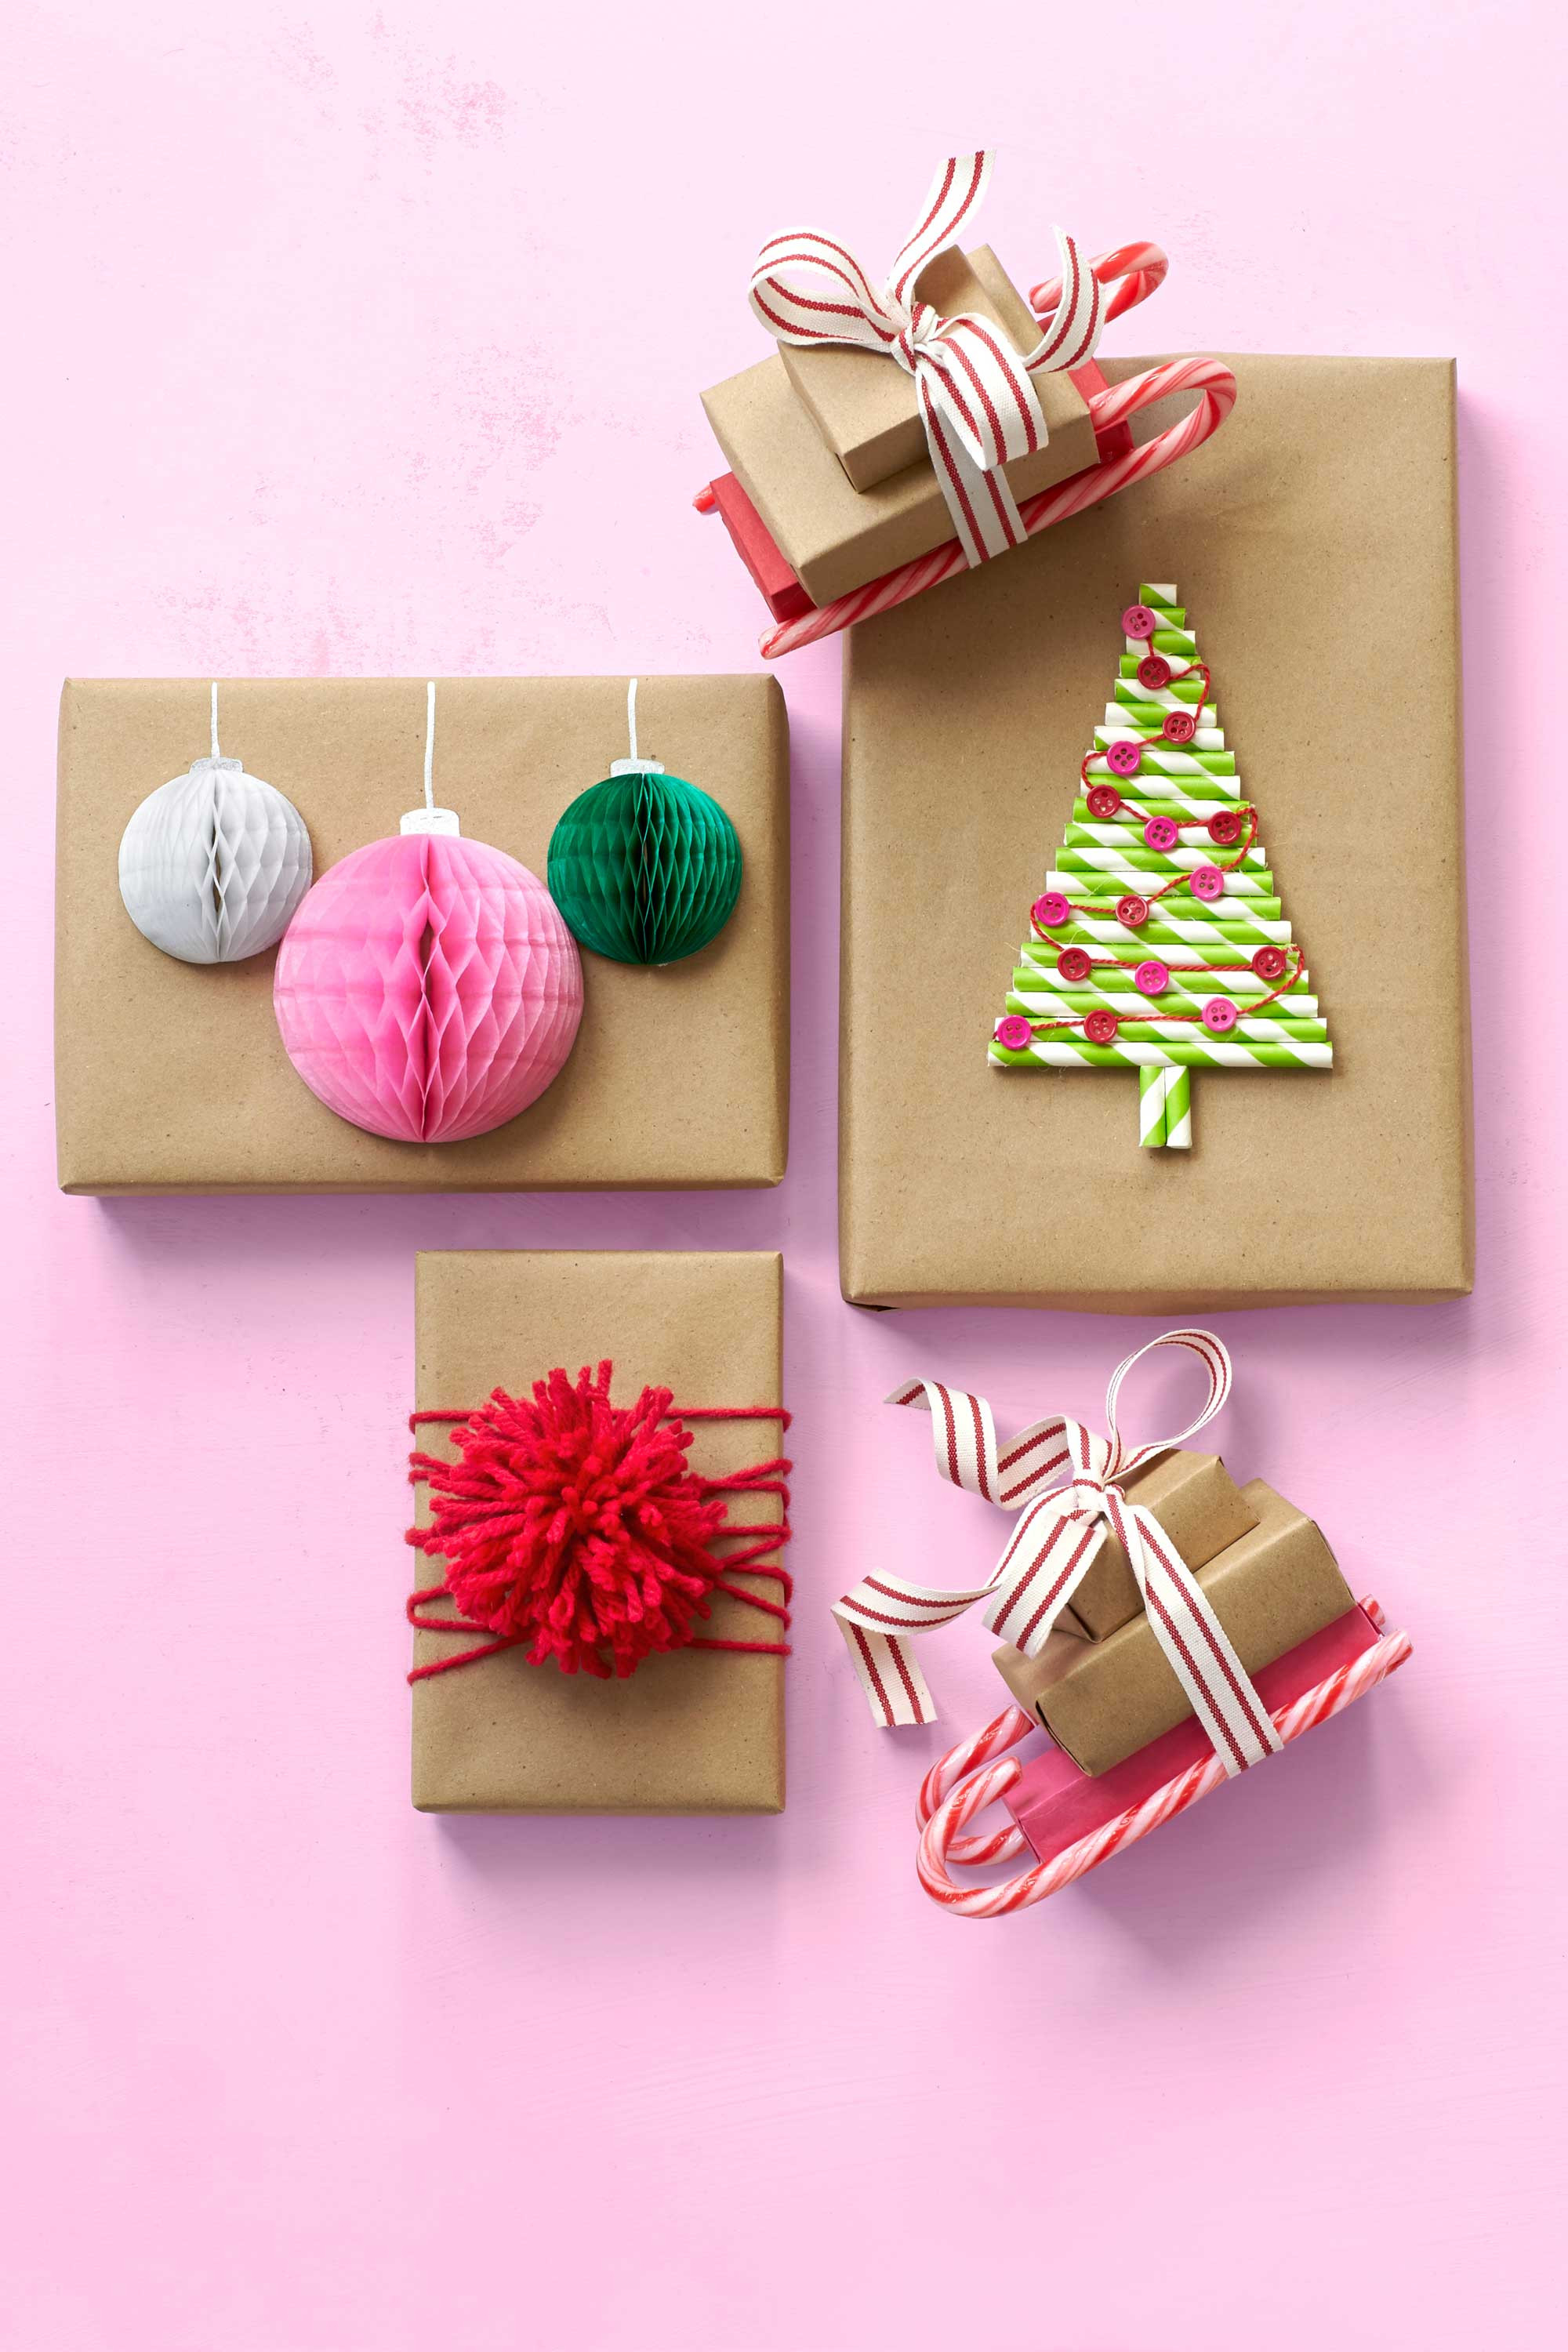 Christmas Gift Wrapping Ideas
 30 Unique Gift Wrapping Ideas for Christmas How to Wrap